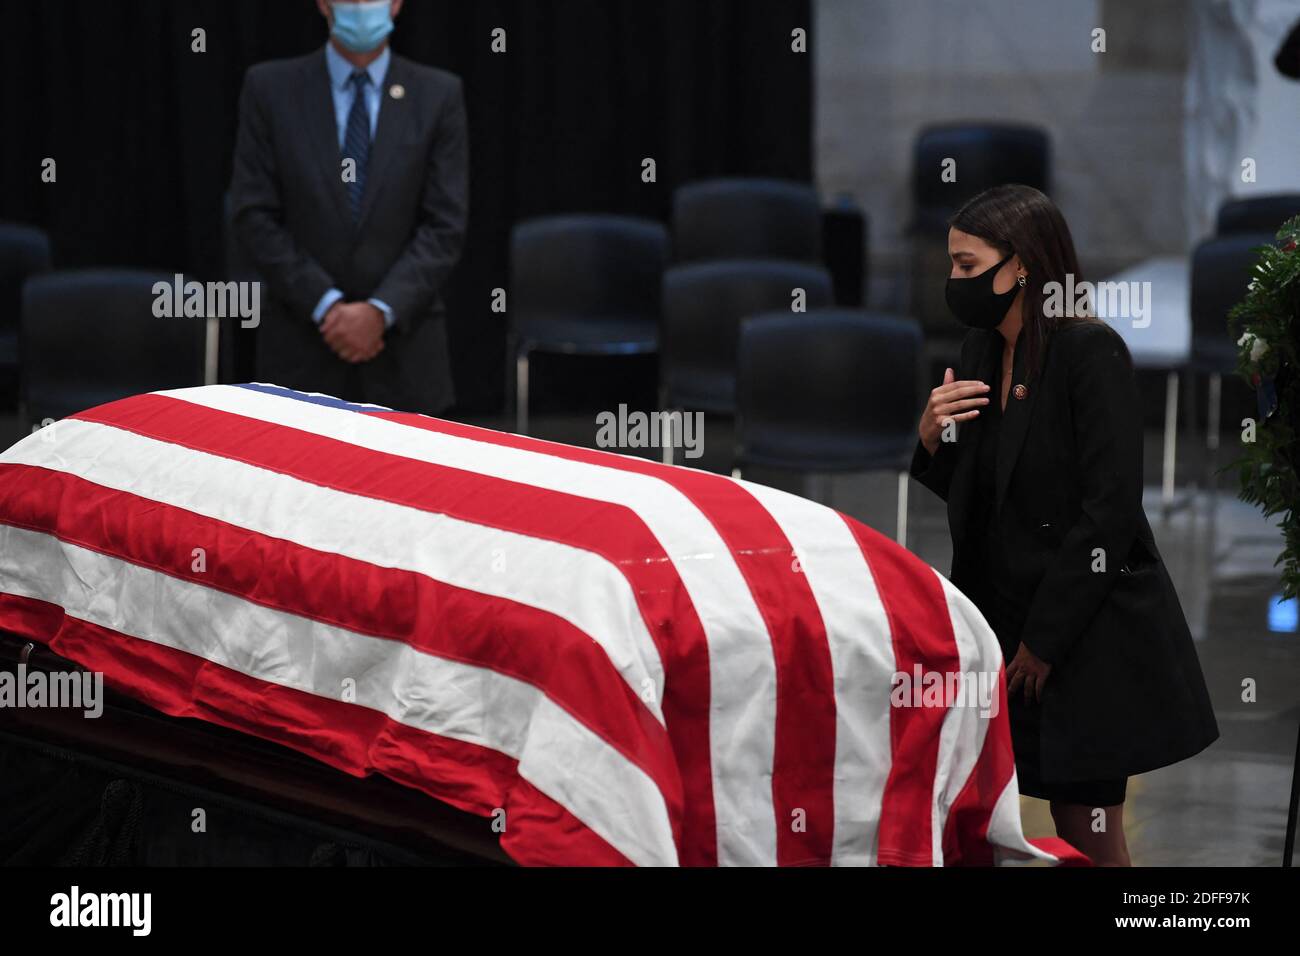 Congresswoman Alexandria Ocasio-Cortez (D-NY) pays her respect to Congressman John Lewis (D- GA) after the memorial service on July 27, 2020 in the Rotunda of the U.S. Capitol in Washington D.C.Photo by Matt McClain/Pool/ABACAPRESS.COM Stock Photo